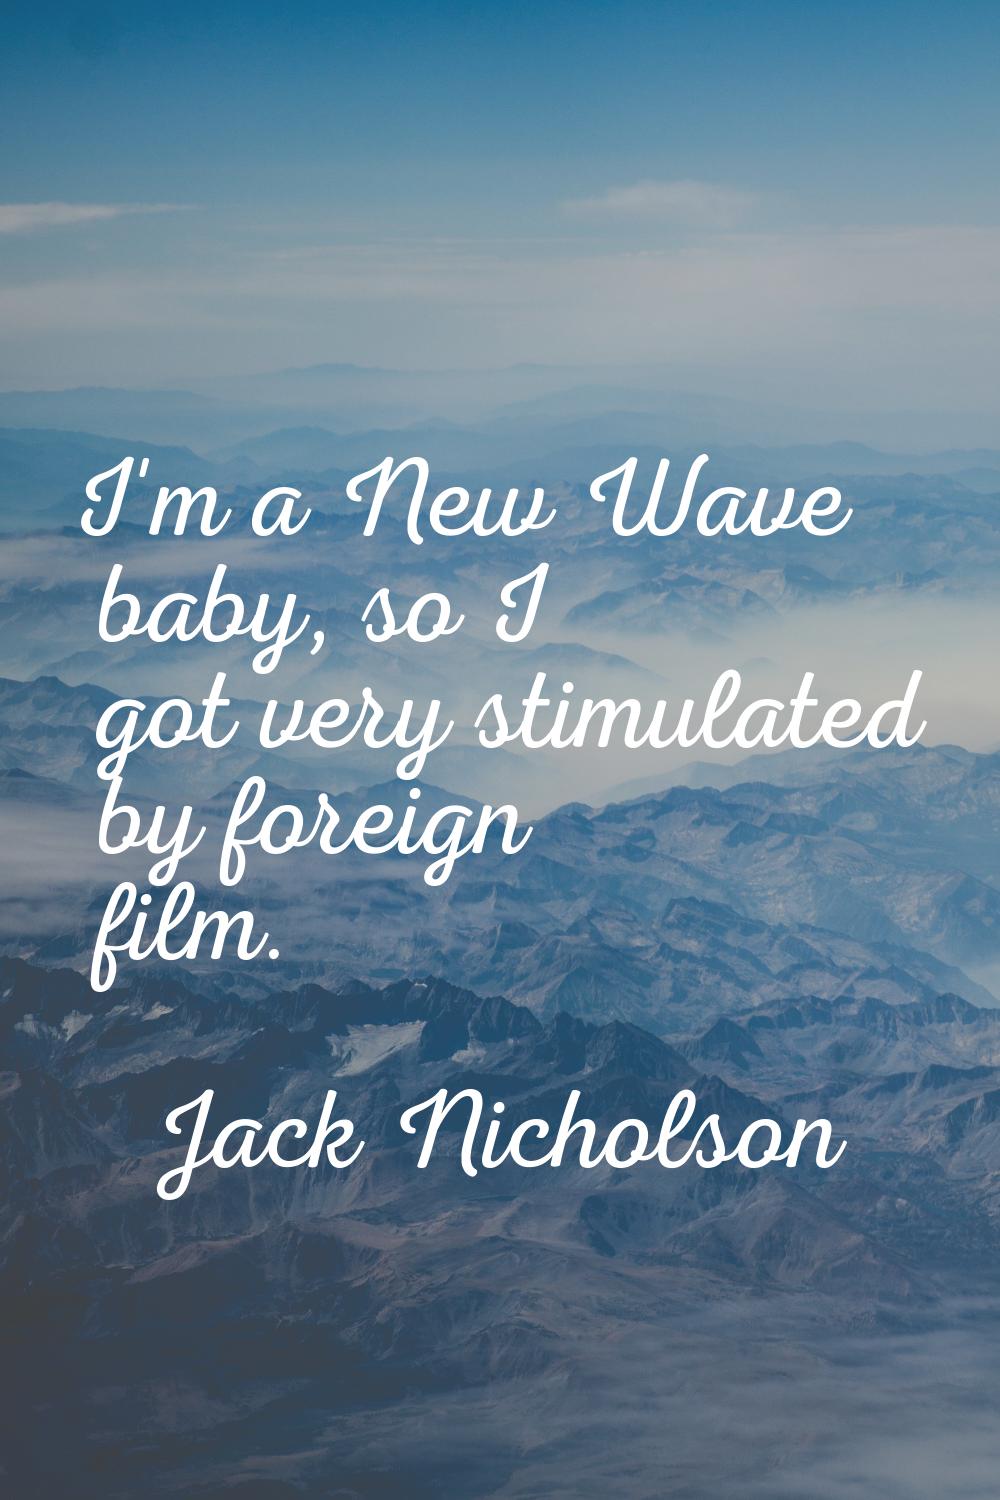 I'm a New Wave baby, so I got very stimulated by foreign film.